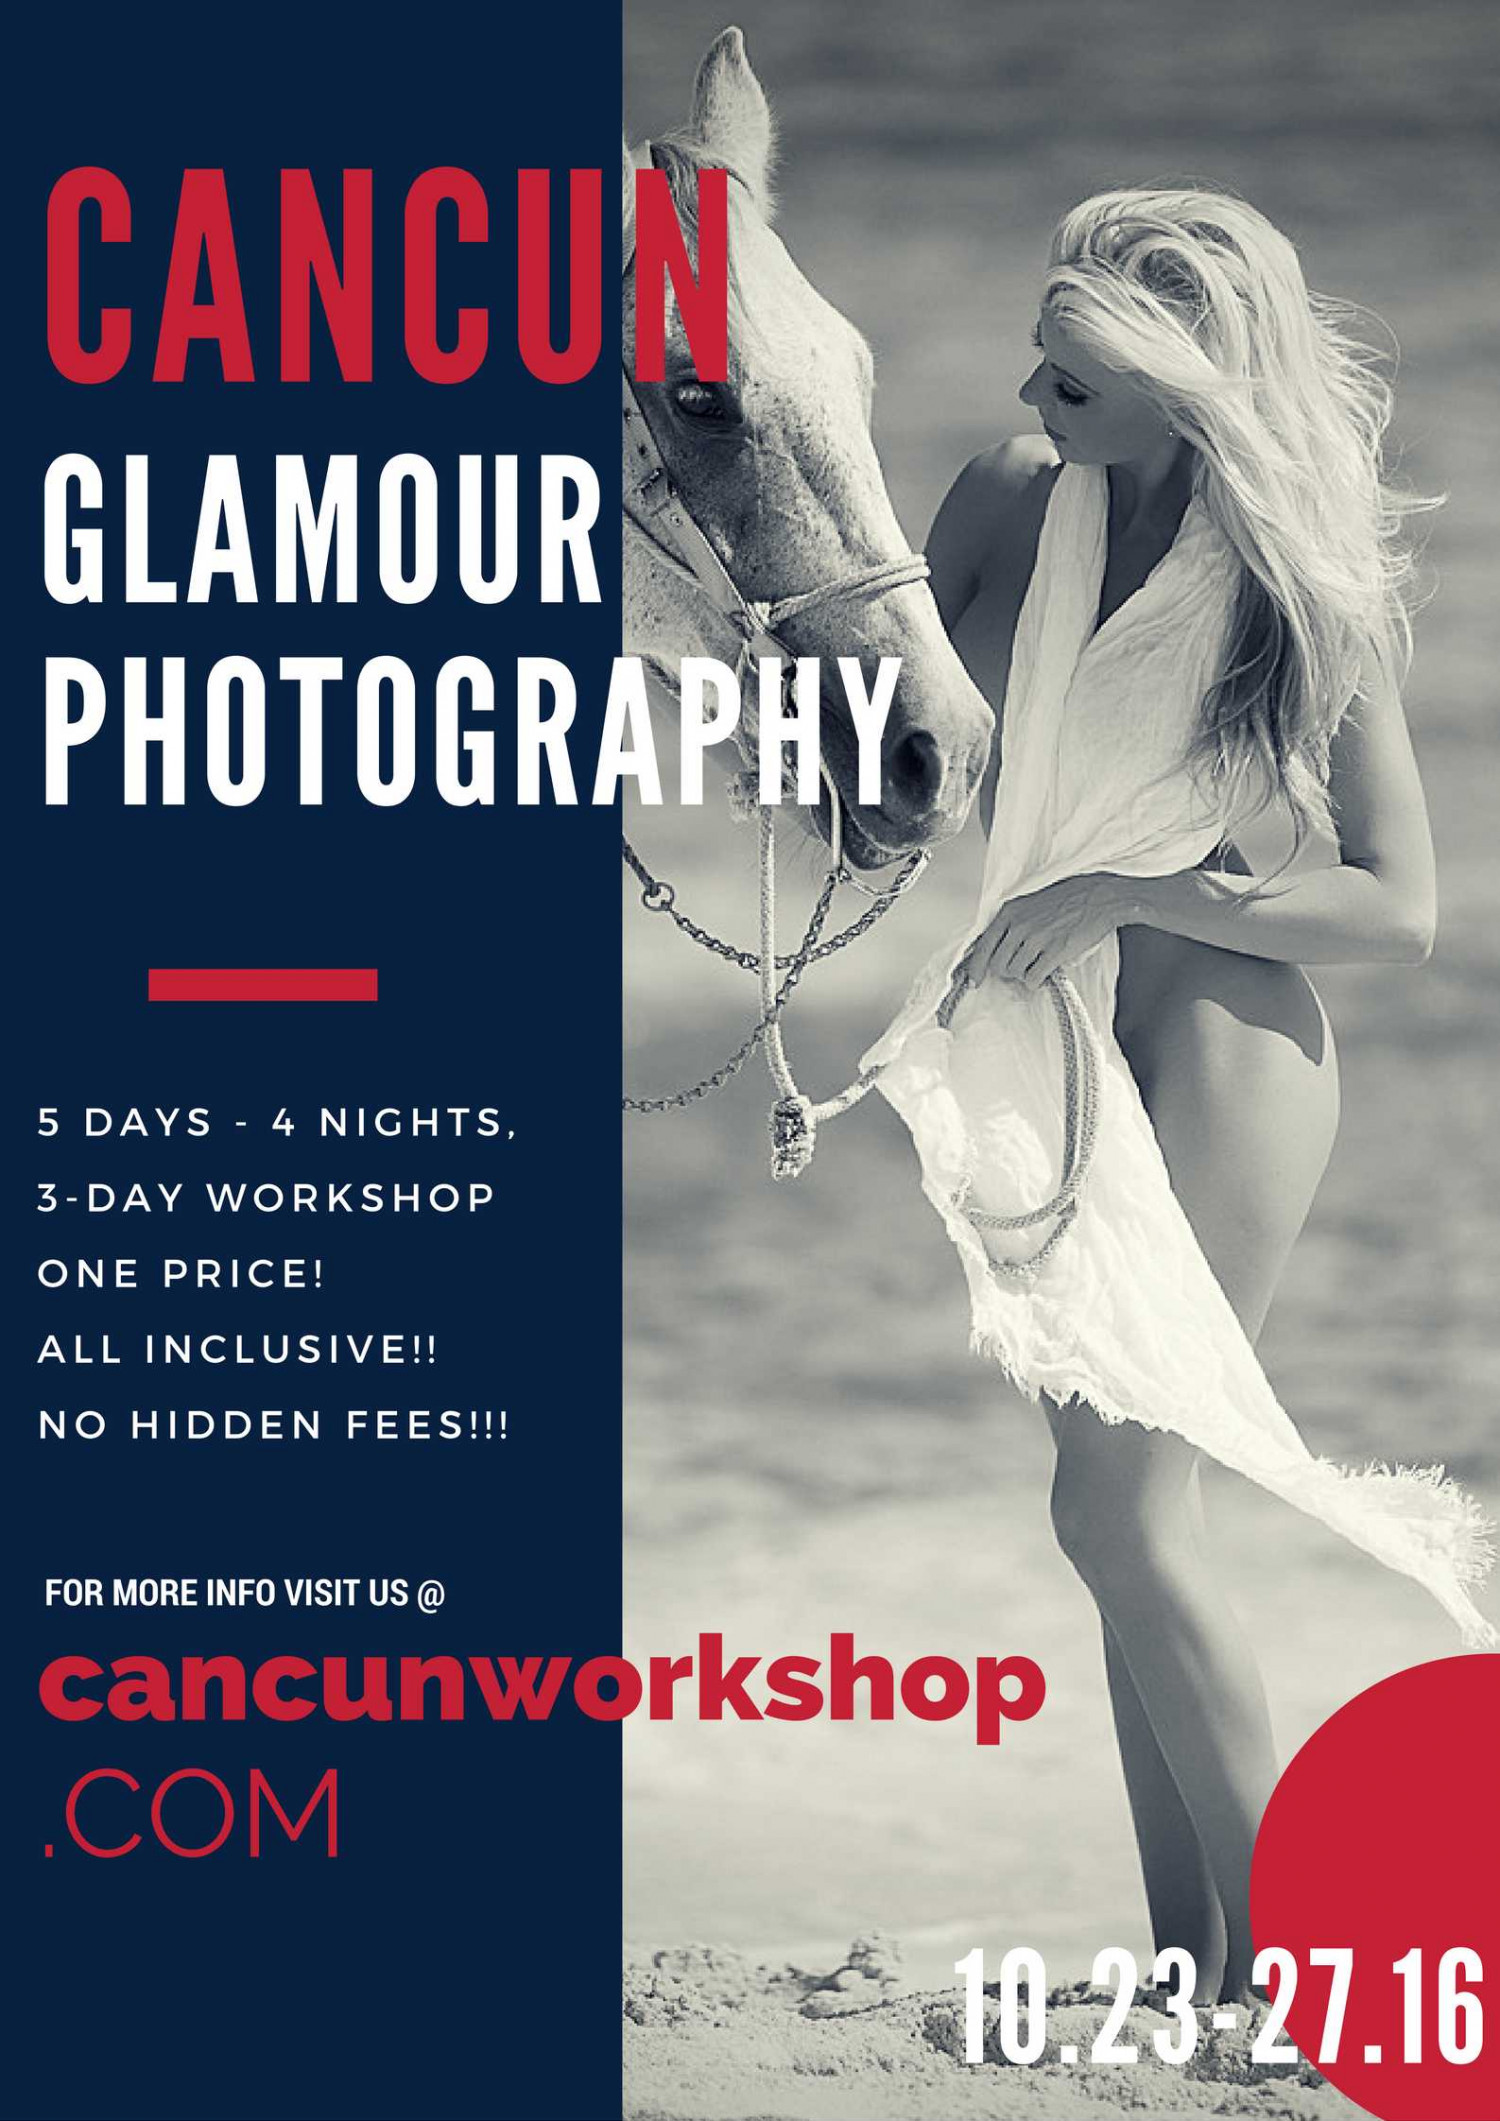    Cancun, Mexico Glamour Photography Workshop All Inclusive! Infographic